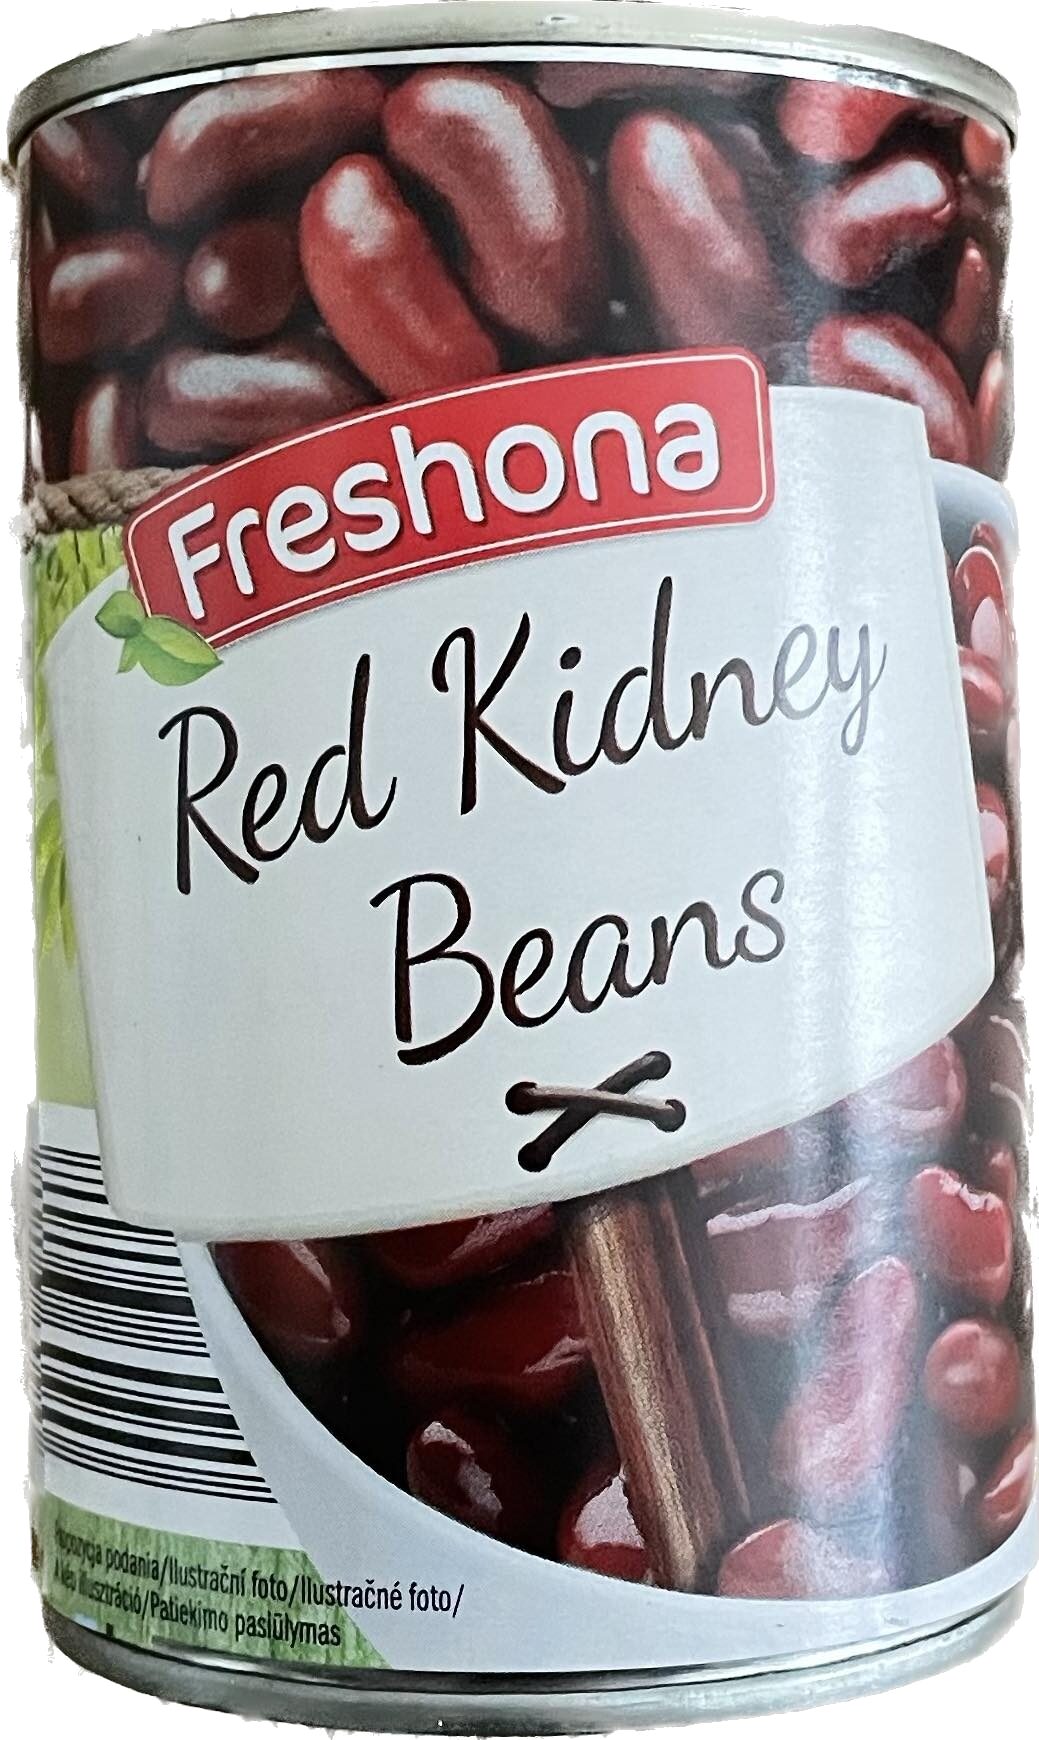 Red Kidney Beans, Canned - Product - en